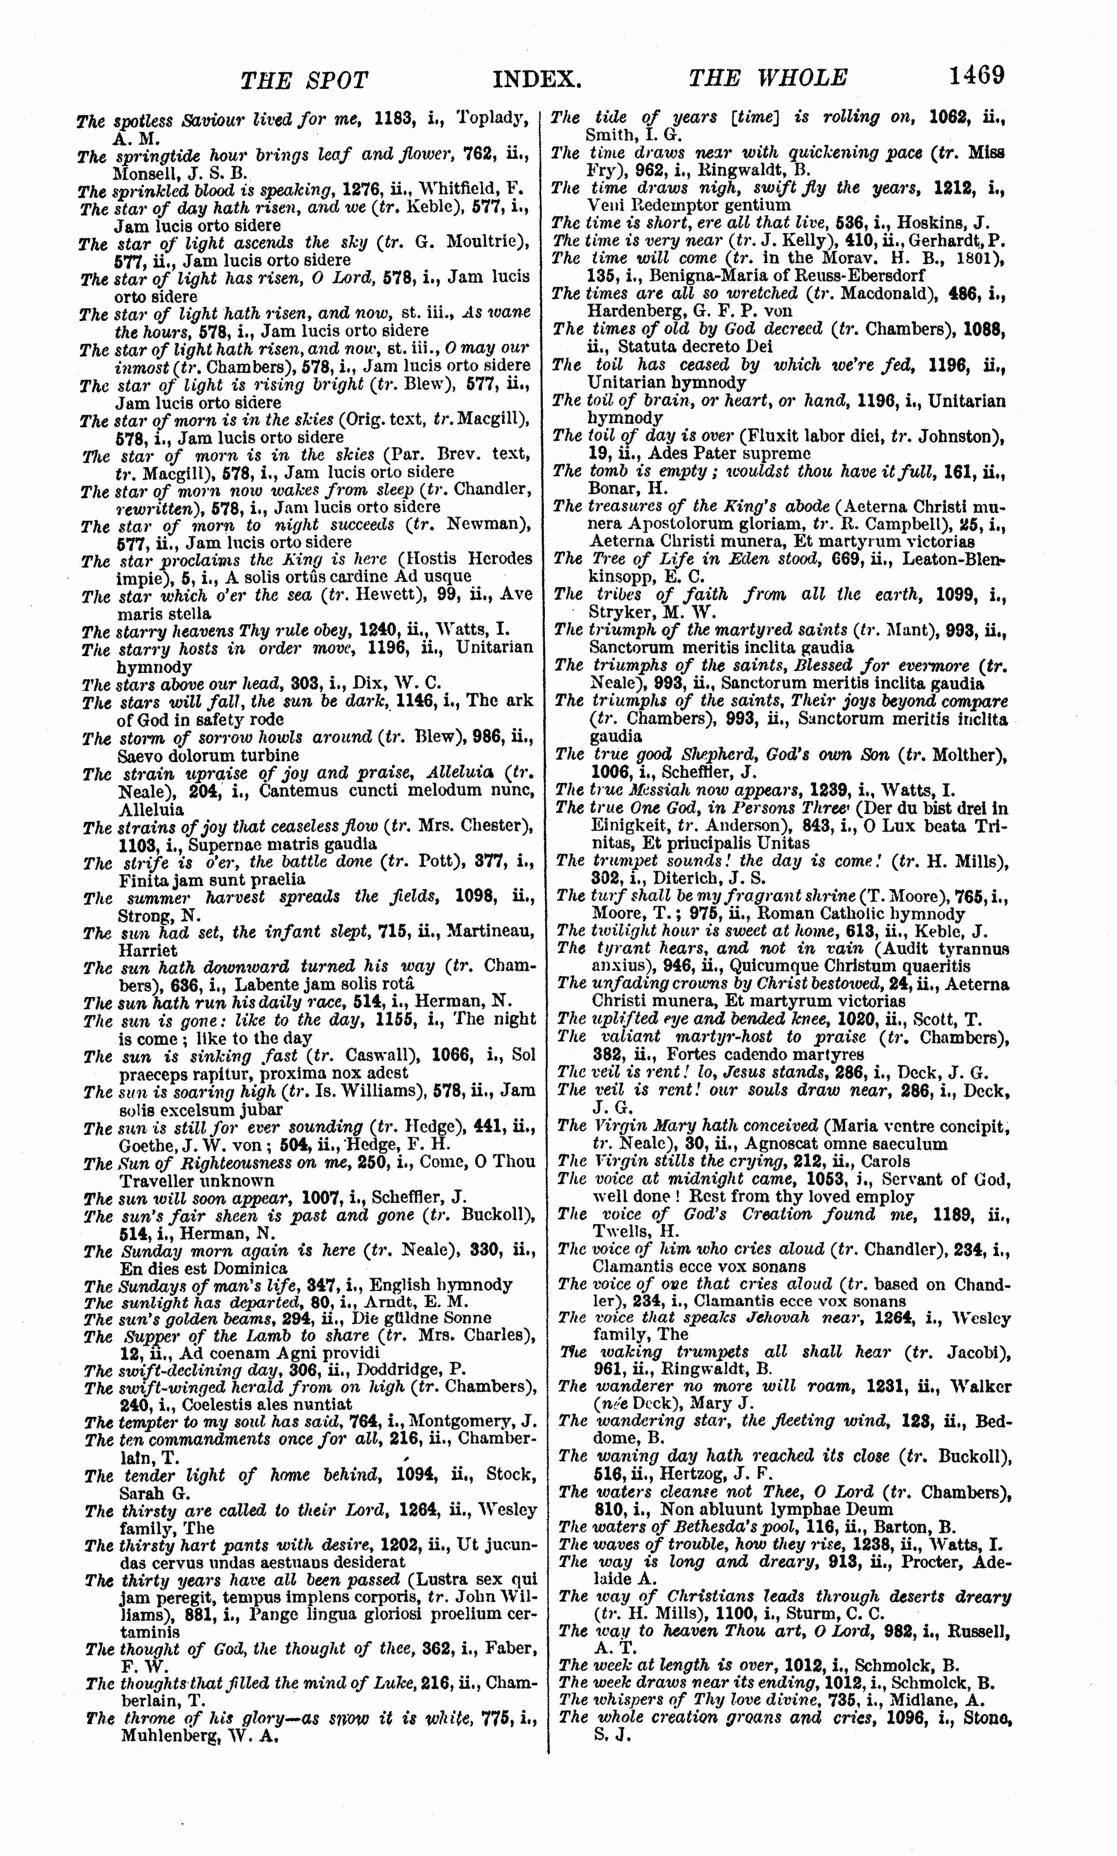 Image of page 1469